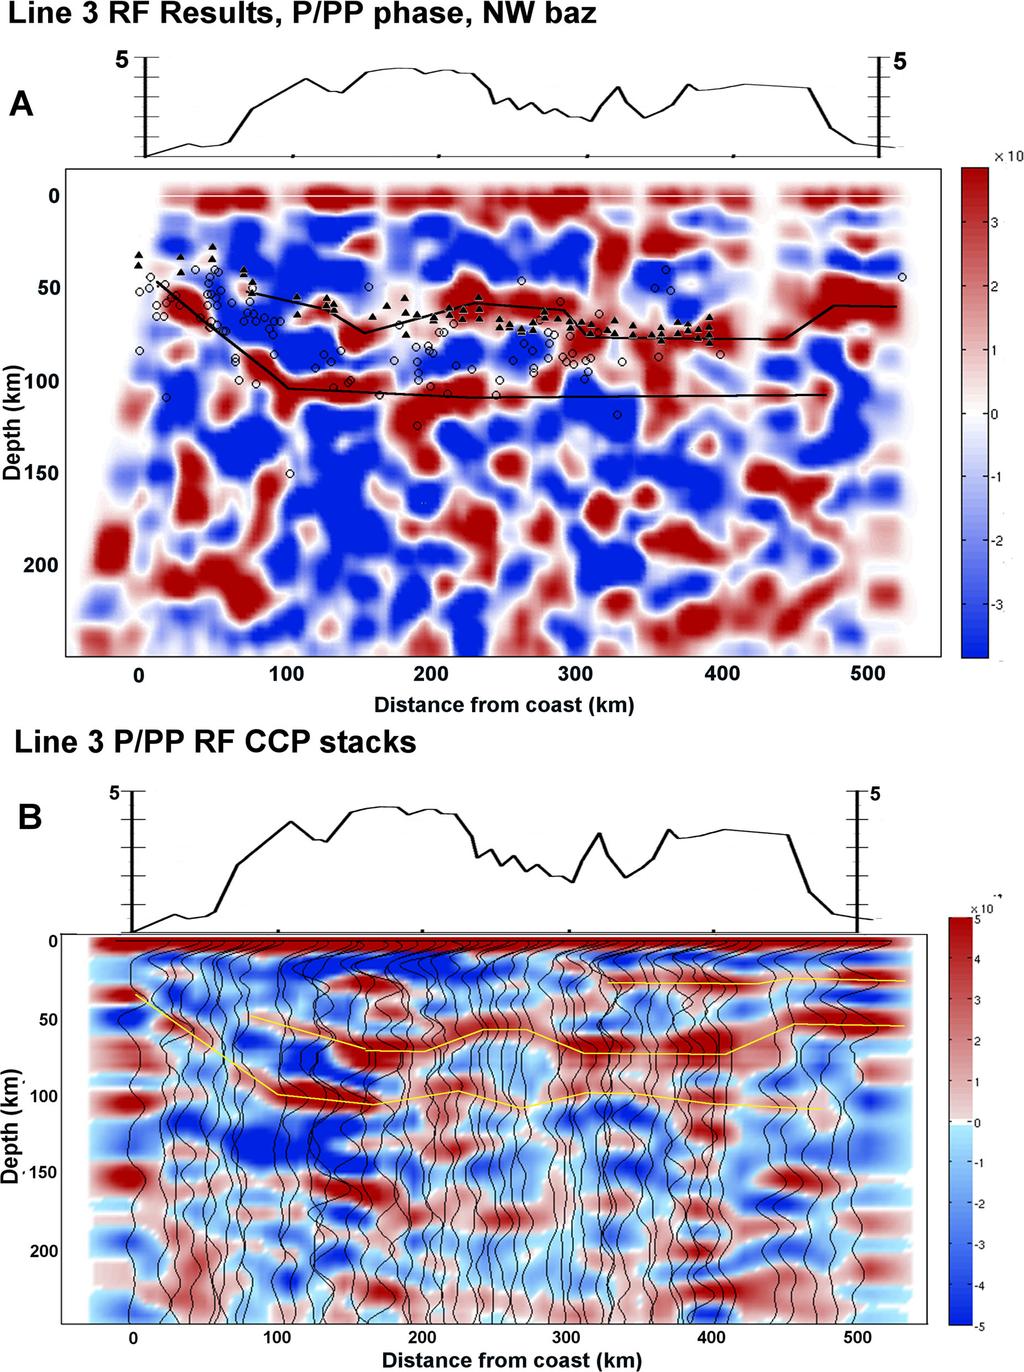 Structure transition region southern Peru 1895 Figure 6. (a) Receiver function image for Line 3 based on P and PP receiver functions from an NW azimuth from Peru.